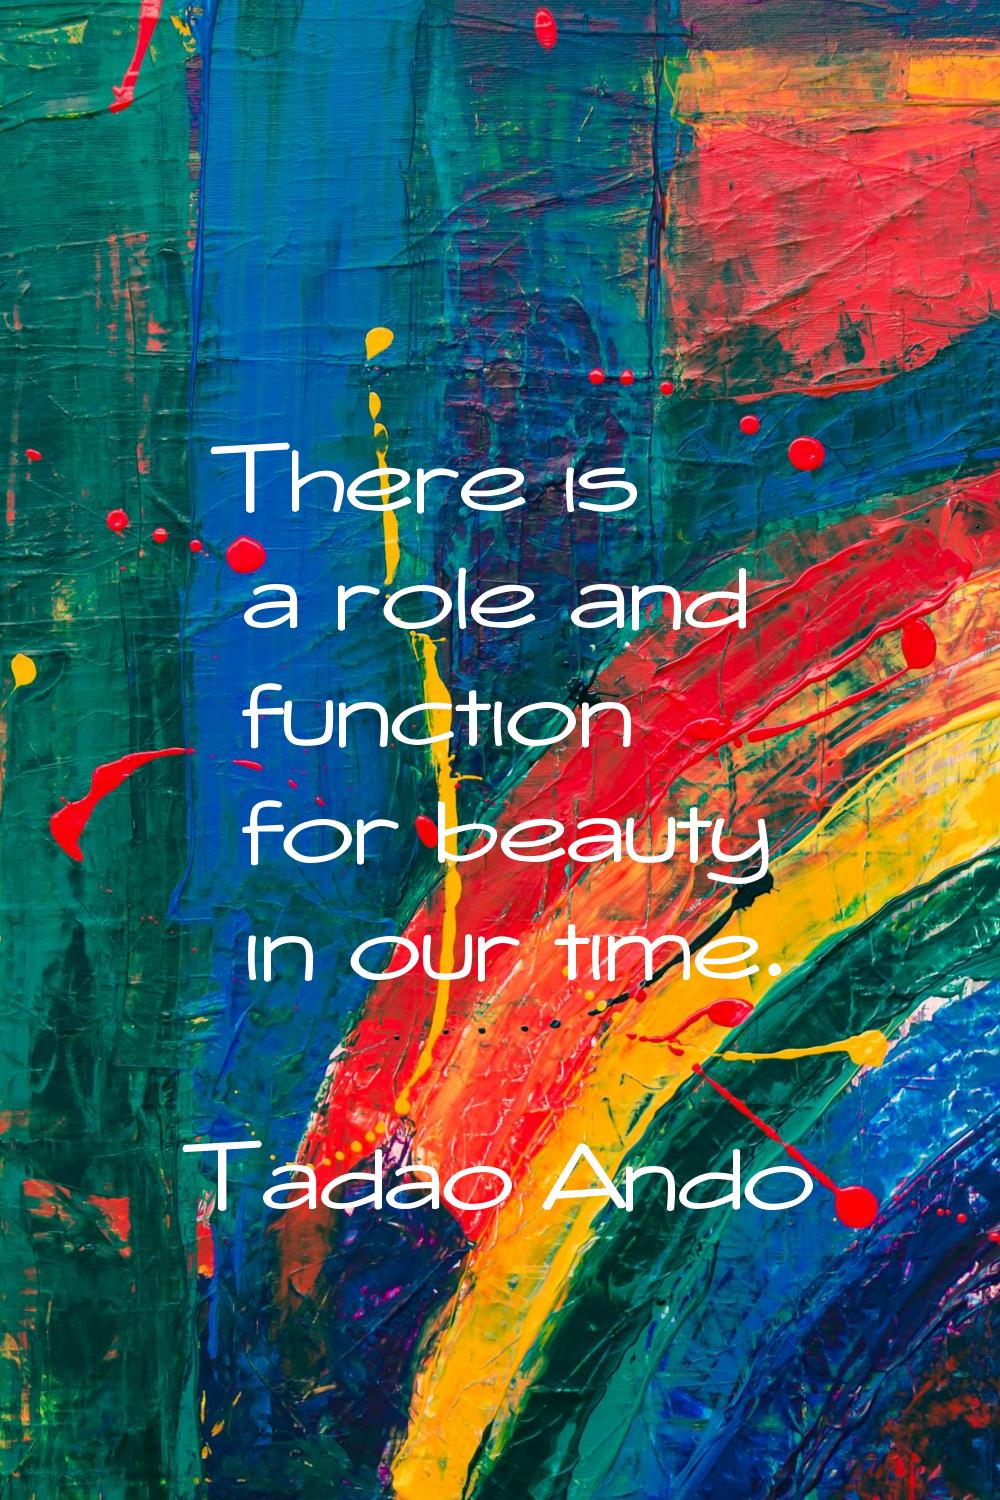 There is a role and function for beauty in our time.